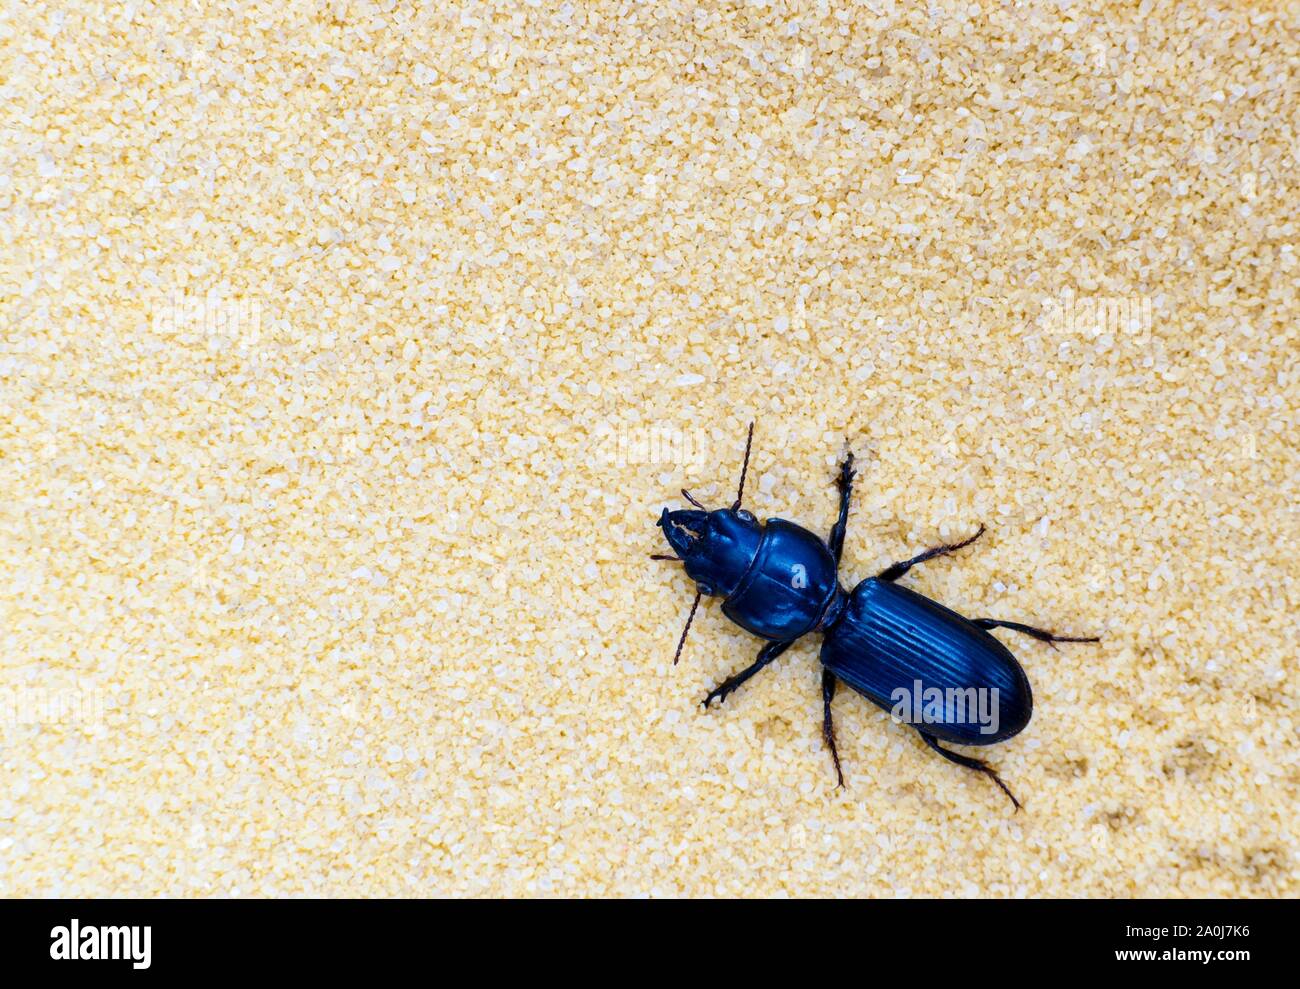 Big-Headed Ground Beetle crawling through light colored sand with room for text. Stock Photo